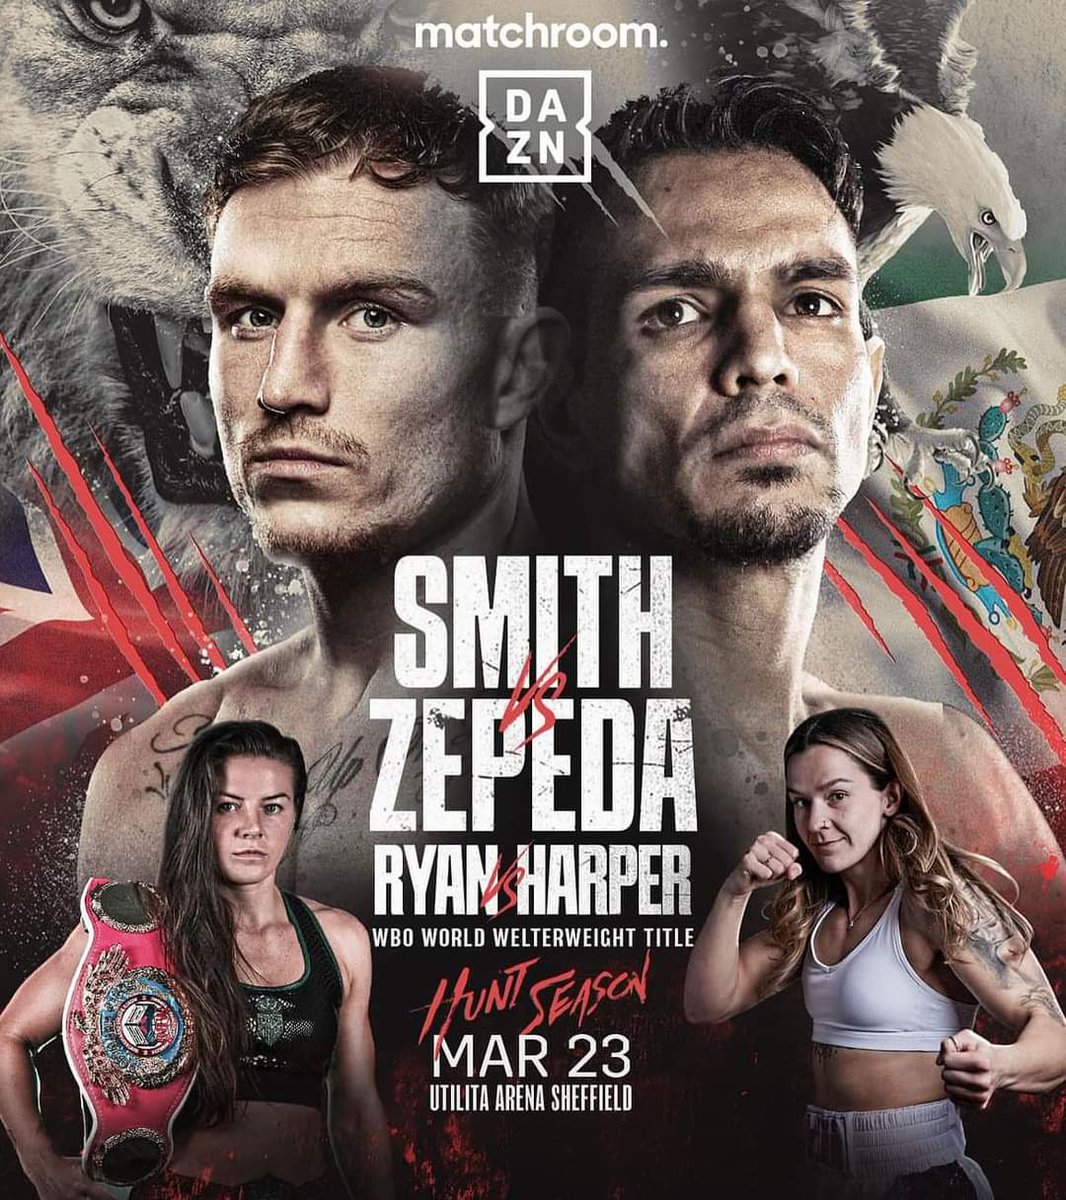 Sandy Ryan vs Terri Harper 🔥🔥🔥
Massive fight,I can't wait for this one hotel already booked in Sheffield a few weeks ago,Terri Harper to become 3 weight world champion 

#RyanHarper #SandyRyan #TerriHarper #MatchroomBoxing